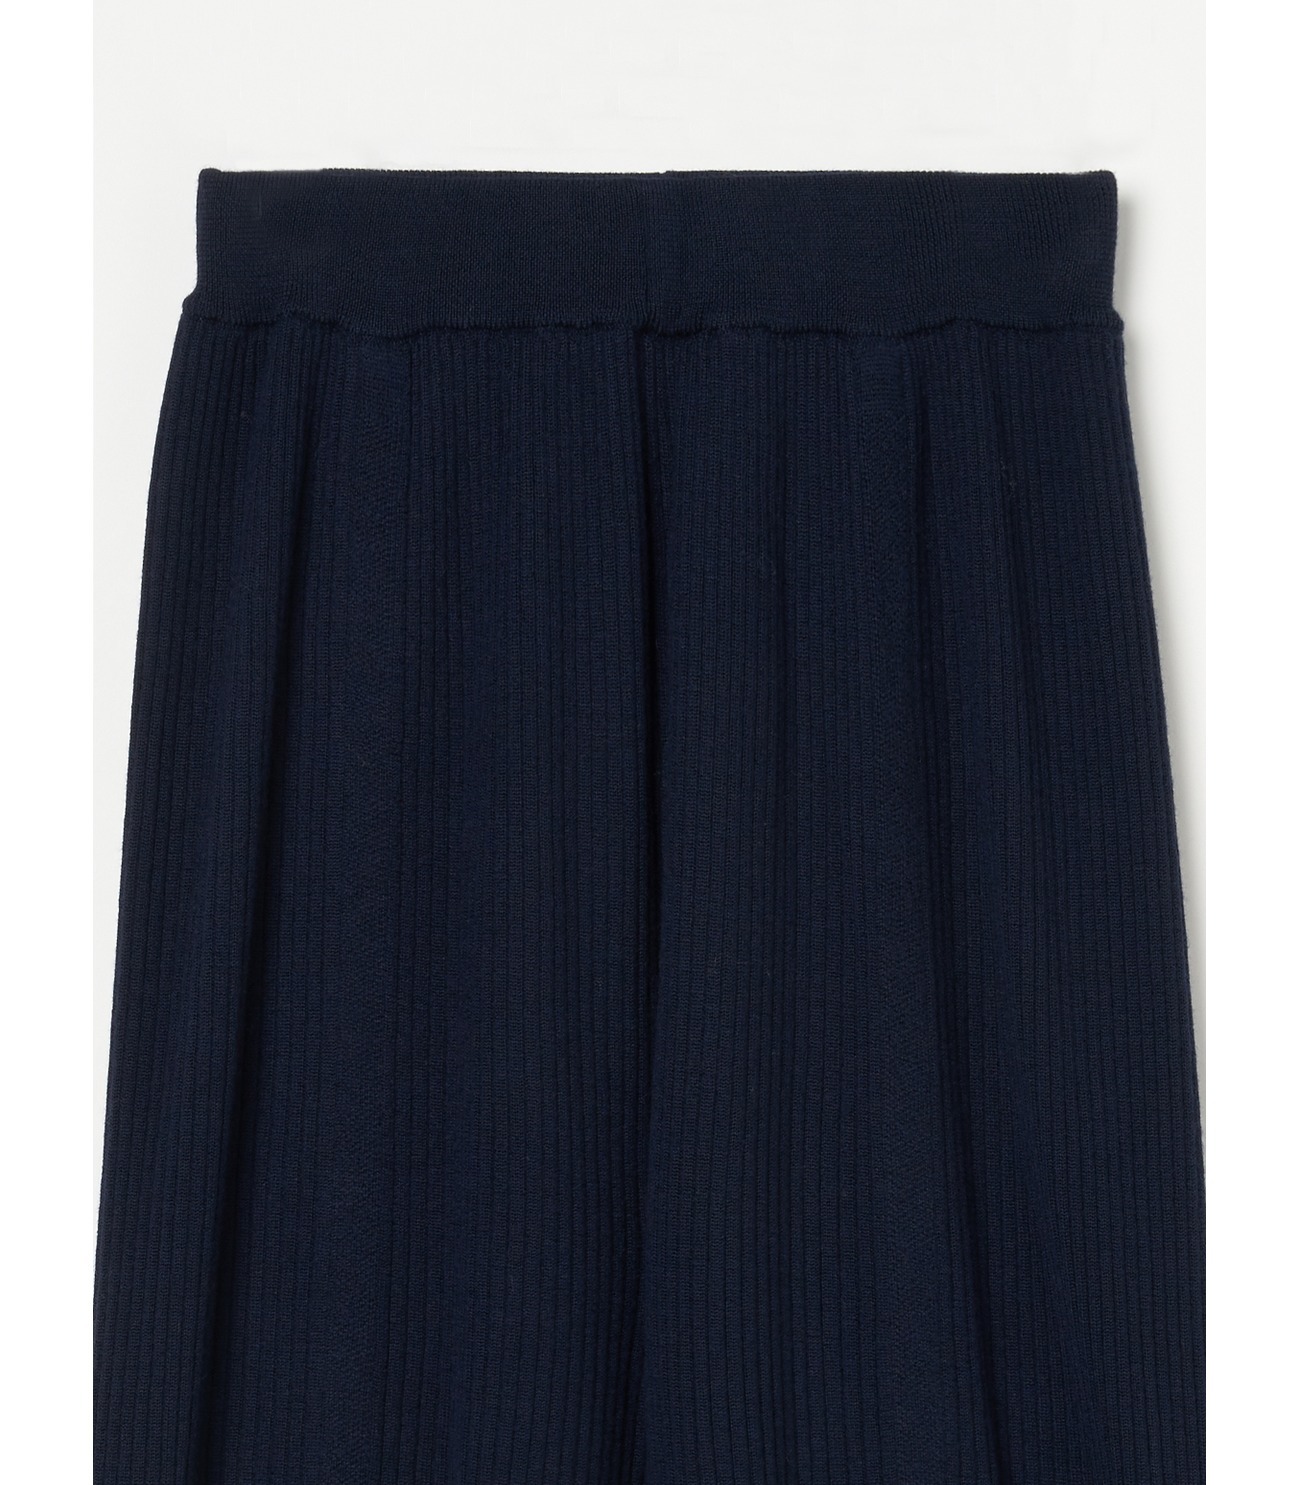 Wool outfit semi wide slit pant 詳細画像 navy 2